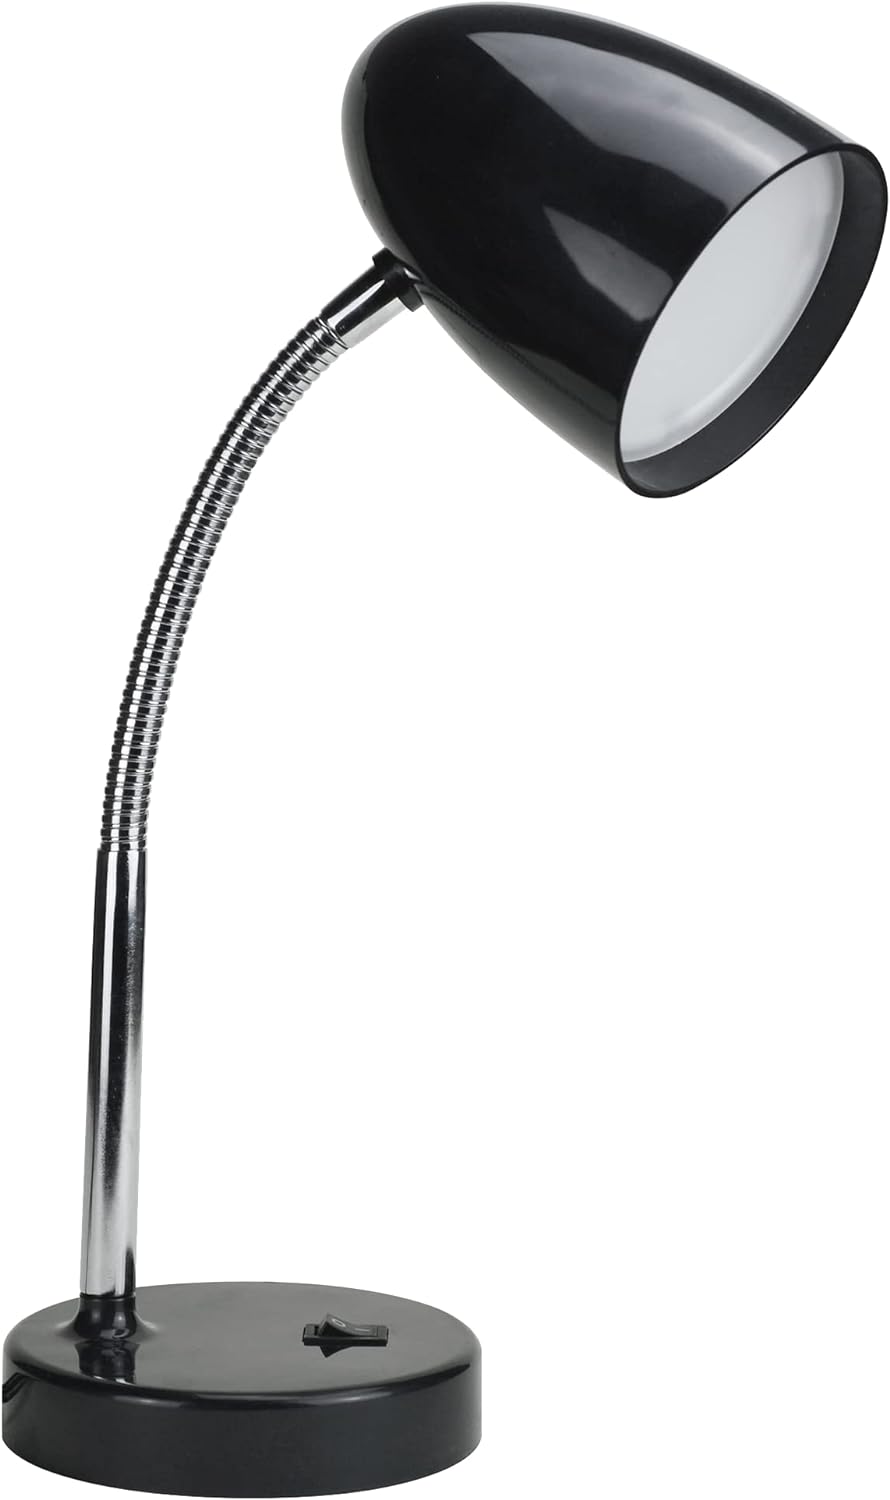 I bought this for some additional light at my craft table, and it' perfect for that application. it' on the small side, so it doesn't take up much space, but it' bright, and you can bend the neck to direct the light where you need it. As a functional, affordable little lamp, I'd highly recommend it.